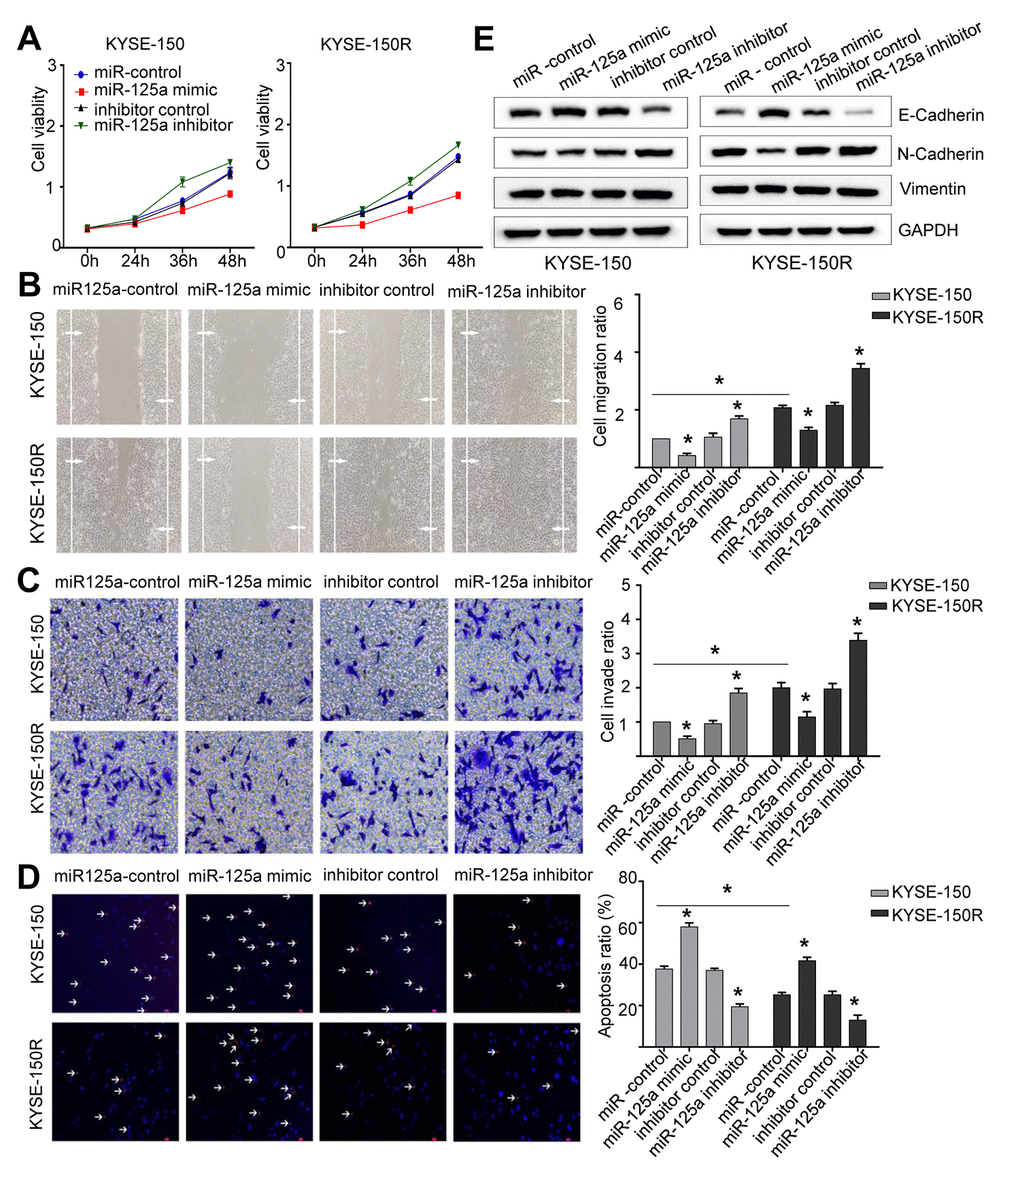 miR-125a attenuates cell proliferation, migration invasion, the EMT process and induces apoptosis. KYSE-150 and KYSE-150R cells were transfected with miR-125a mimic or miR-125a inhibitor or their corresponding negative controls. (A) The cell proliferation assay was performed at the indicated time points. (B) Representative micrographs of cell migration assays (left) and the quantification (right). (C) Representative micrographs of cell invasion assays (left) and the quantification (right). (D) Representative micrographs of cell apoptosis assays (left) and the quantification (right). (E) Western blot analysis revealed that the E-cadherin expression level was elevated, while N-cadherin and Vimentin levels were decreased in cells transfected with miR-125a mimic. Data are shown as mean ± SD from three independent experiments. *P